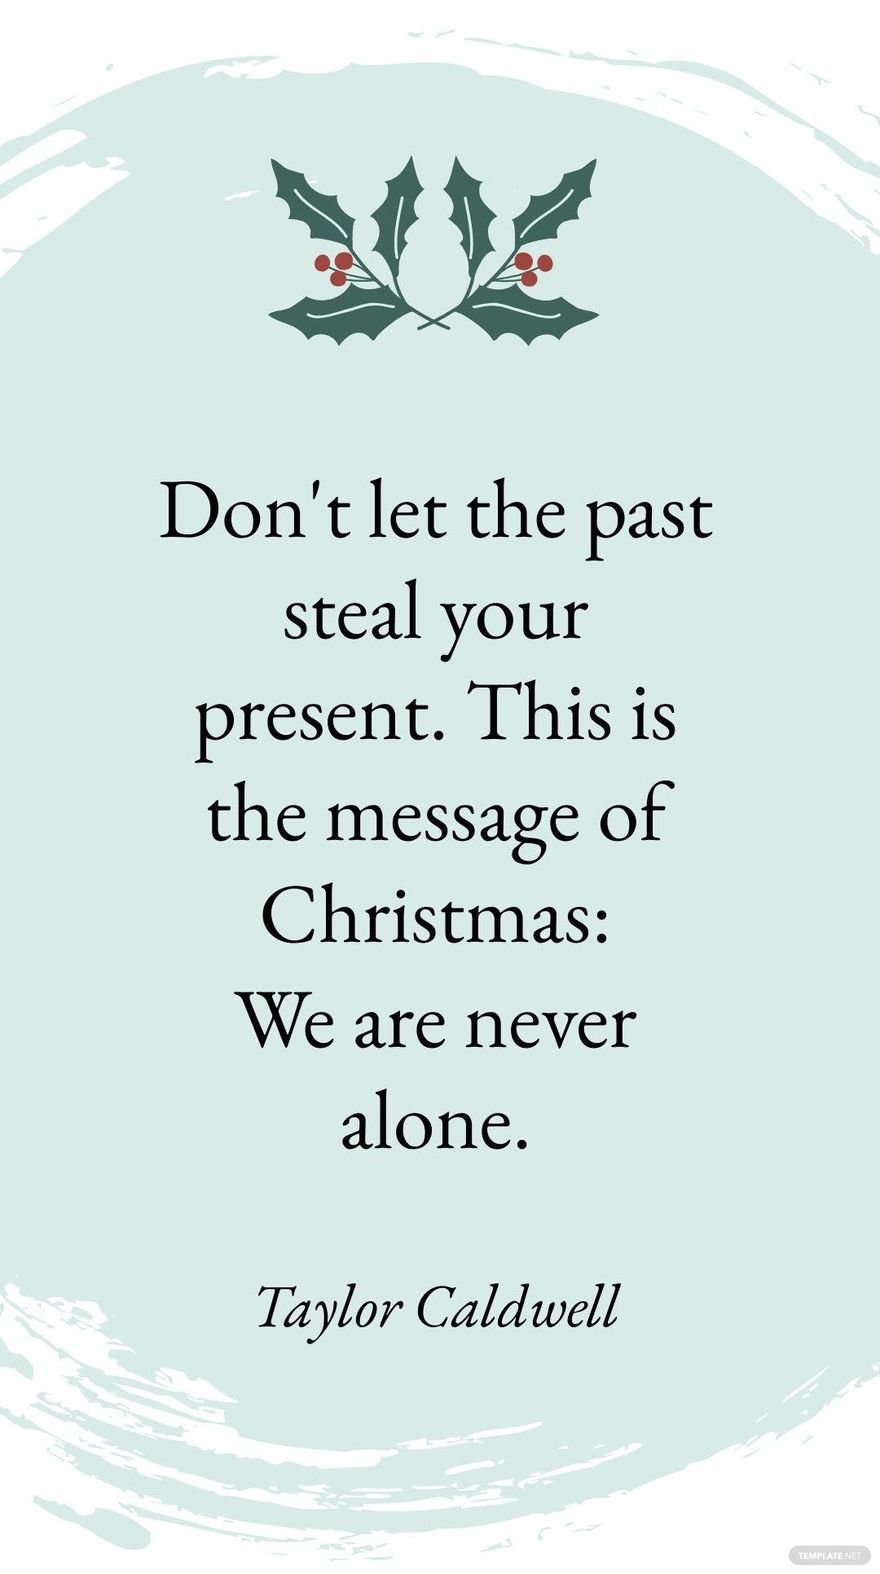 Taylor Caldwell - Don't let the past steal your present. This is the message of Christmas: We are never alone. in JPG